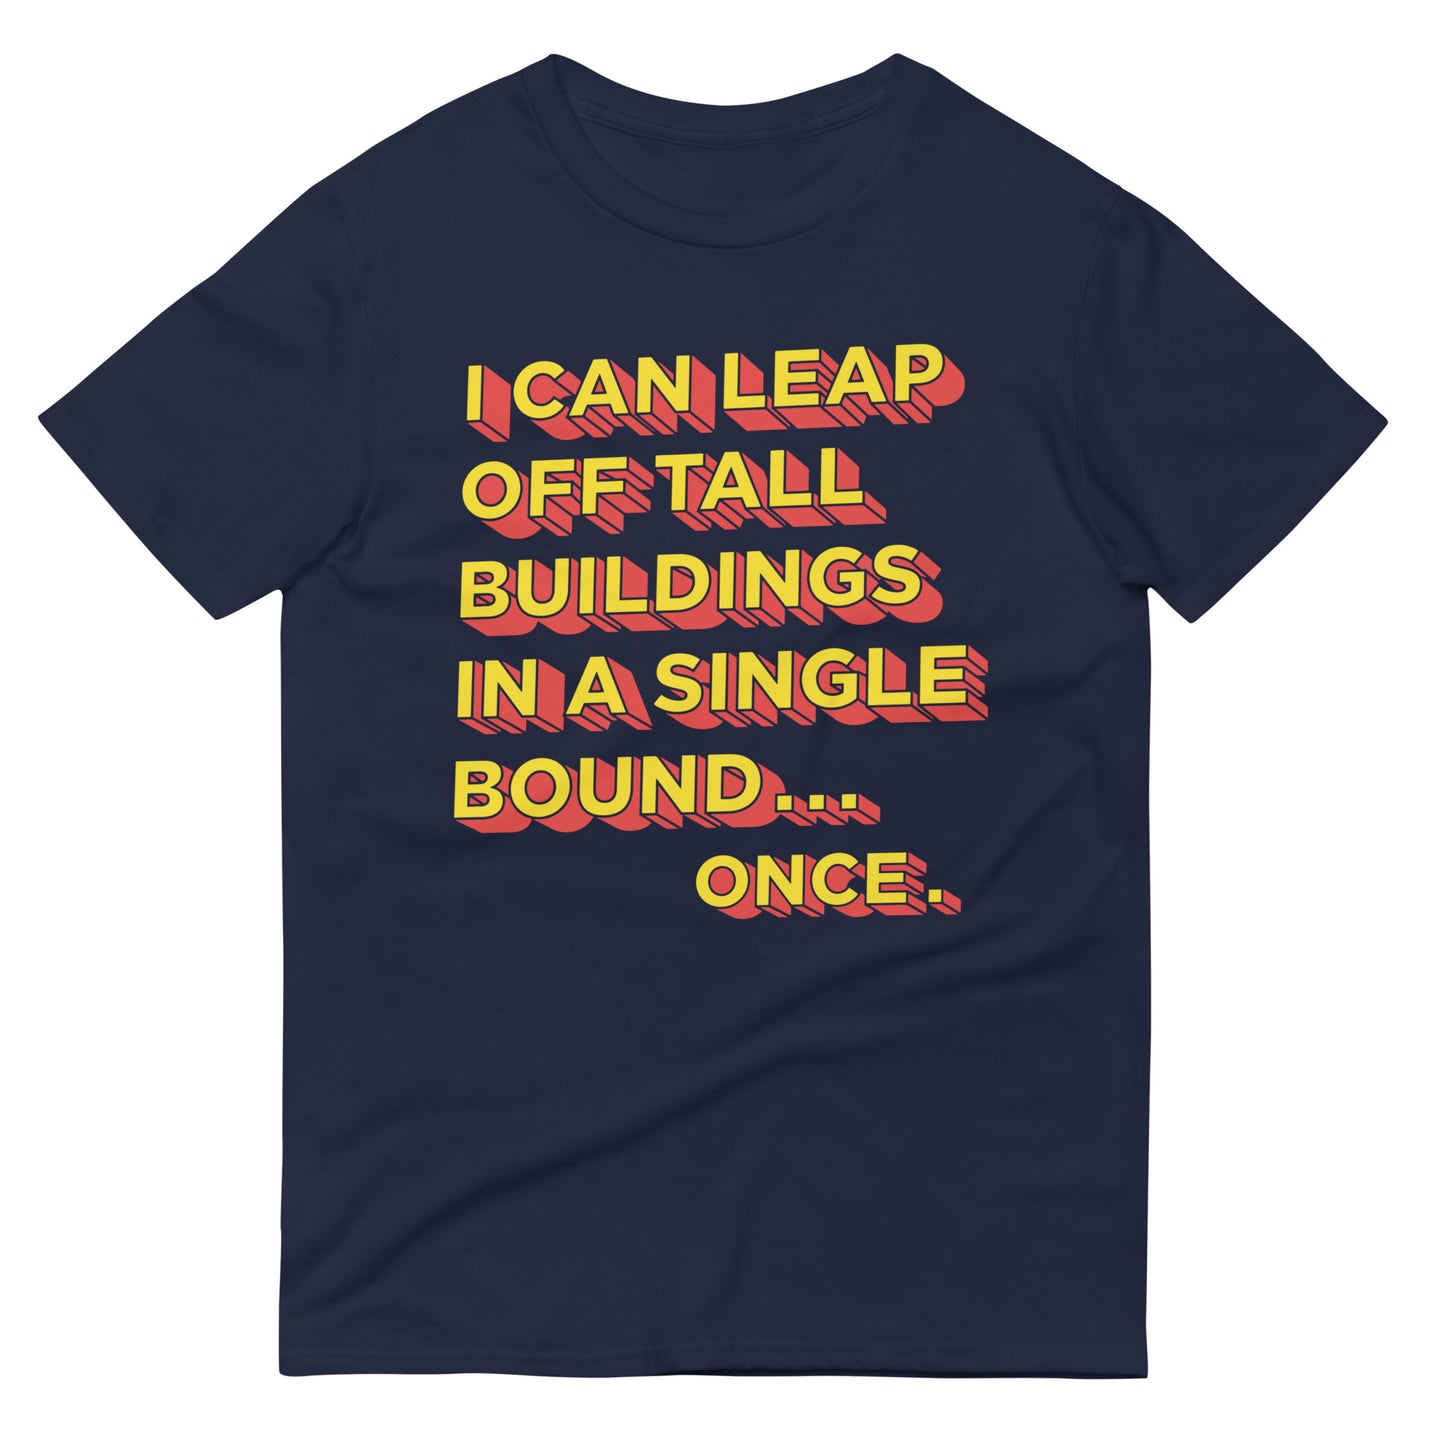 Tall Buildings In A Single Bound Men's Signature Tee